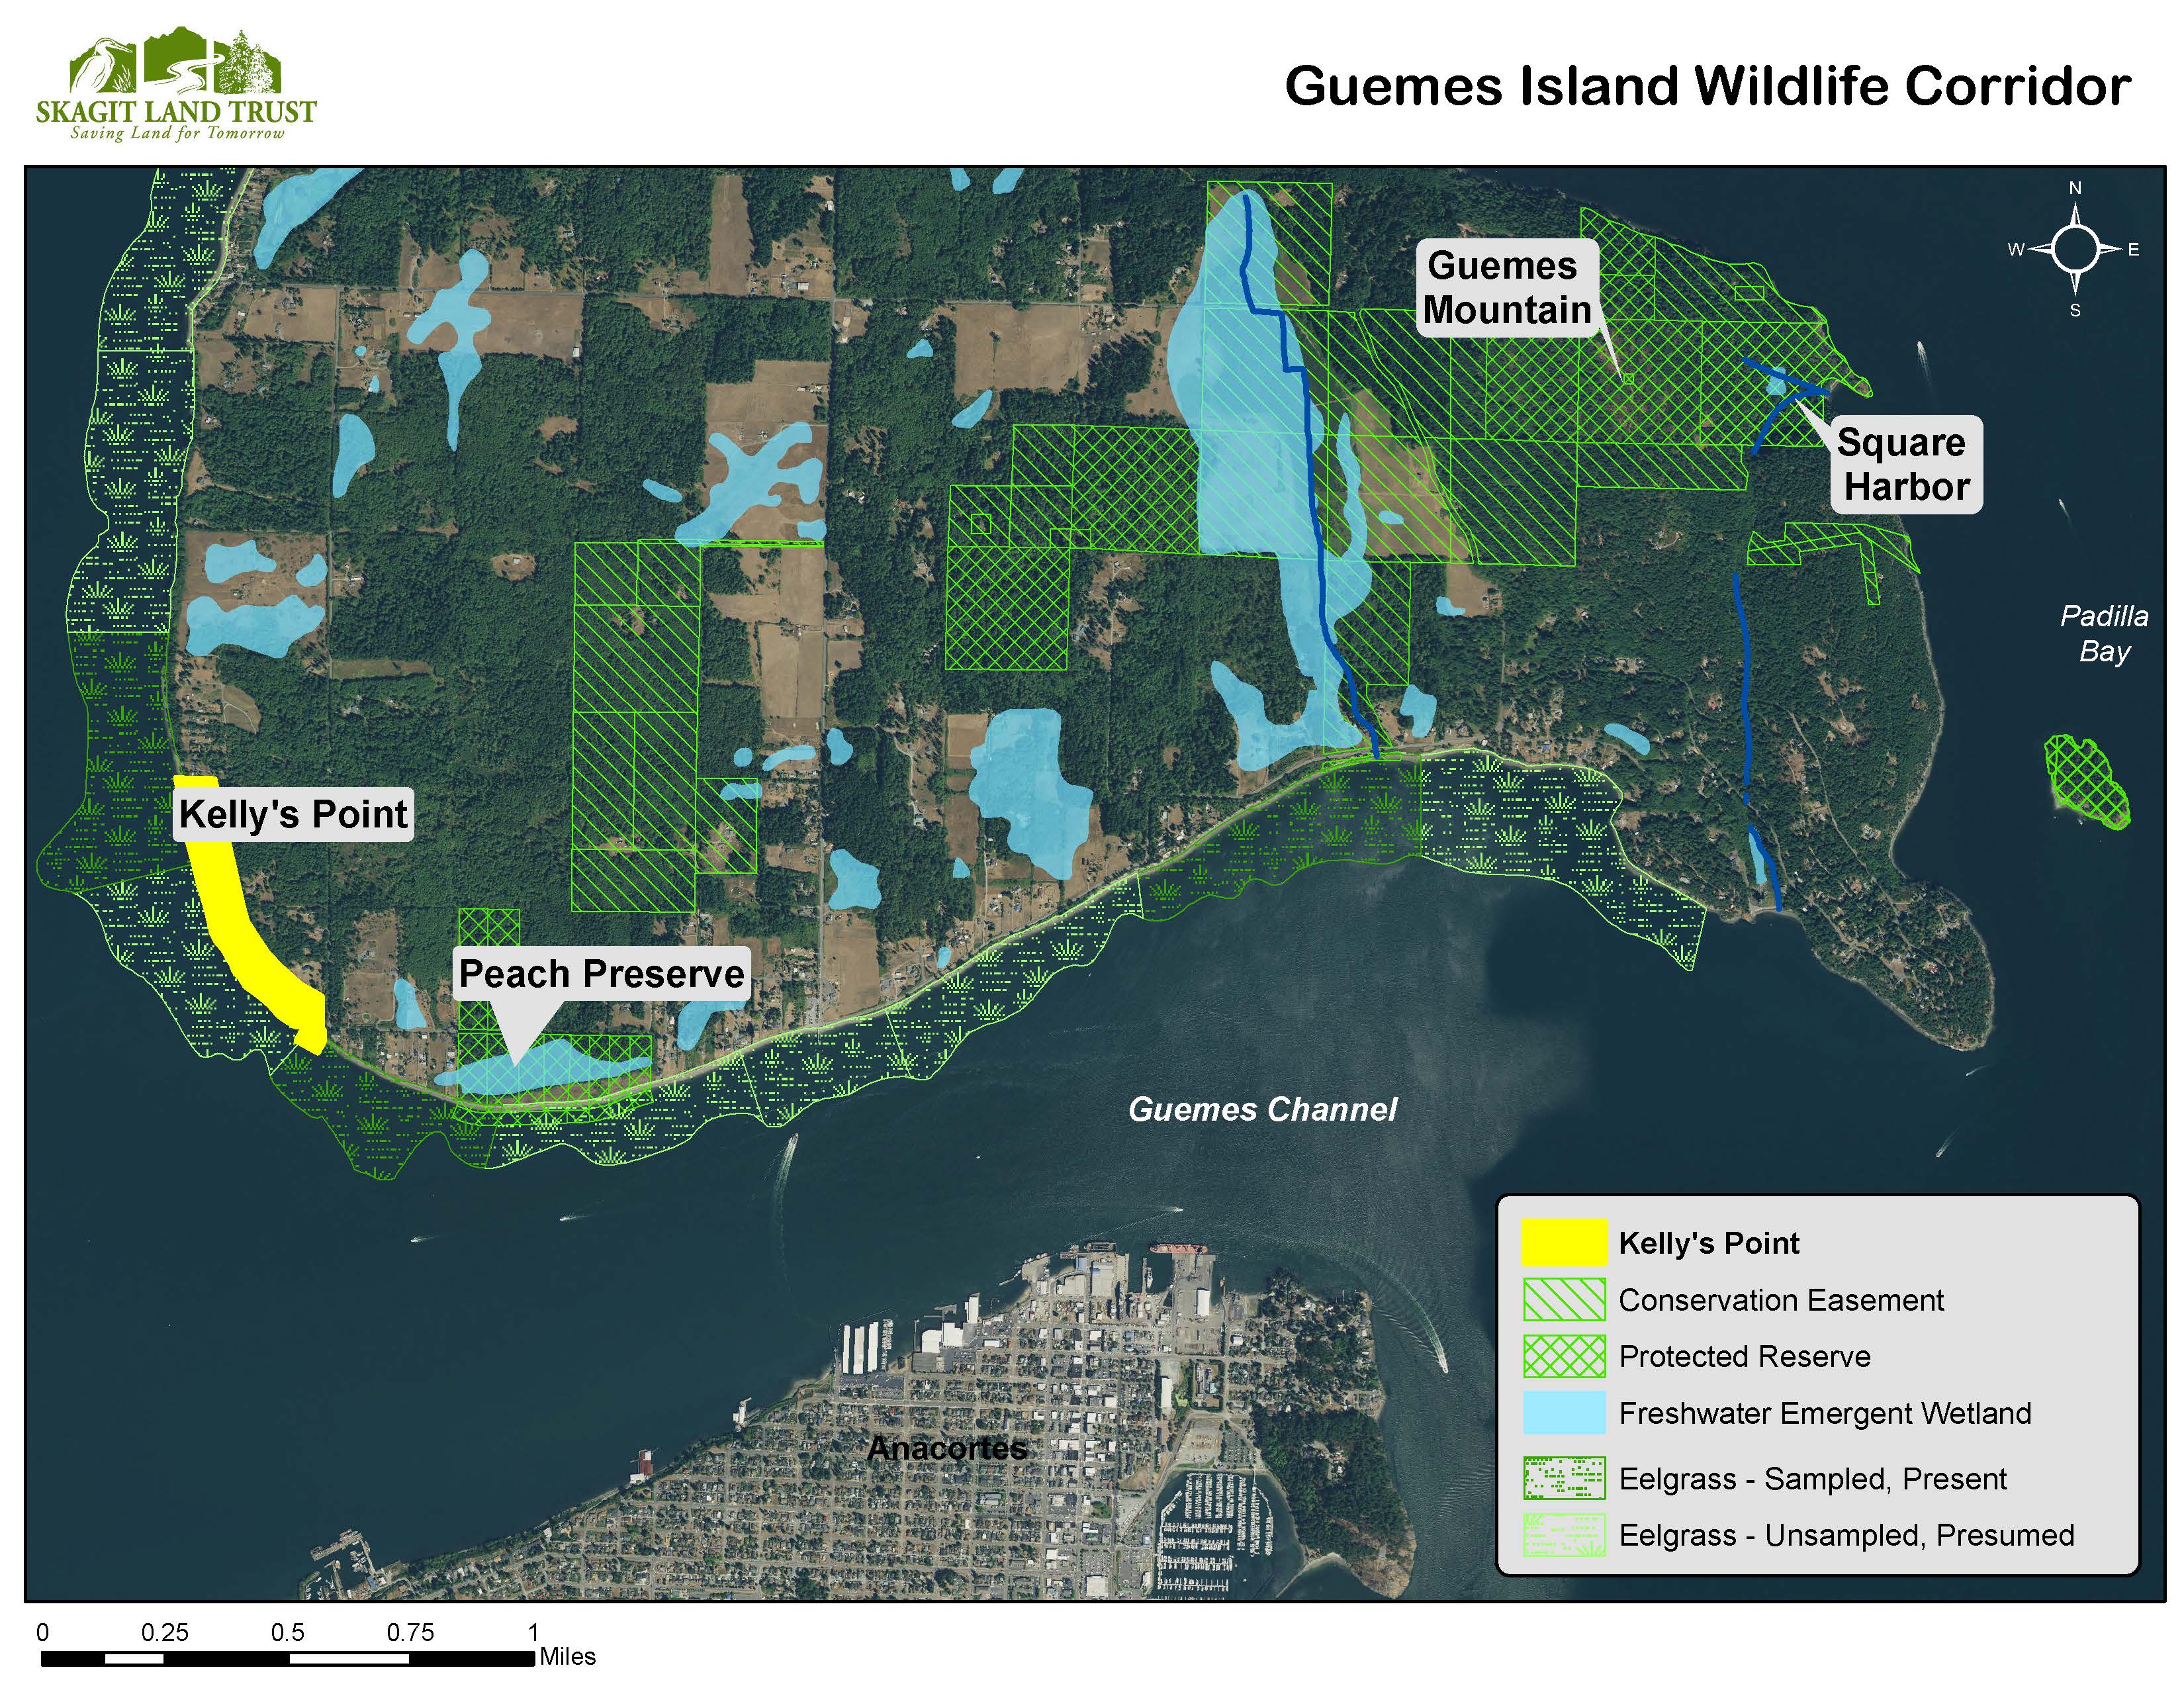 Map of conservation areas on Guemes Island, created by Skagit Land Trust staff.